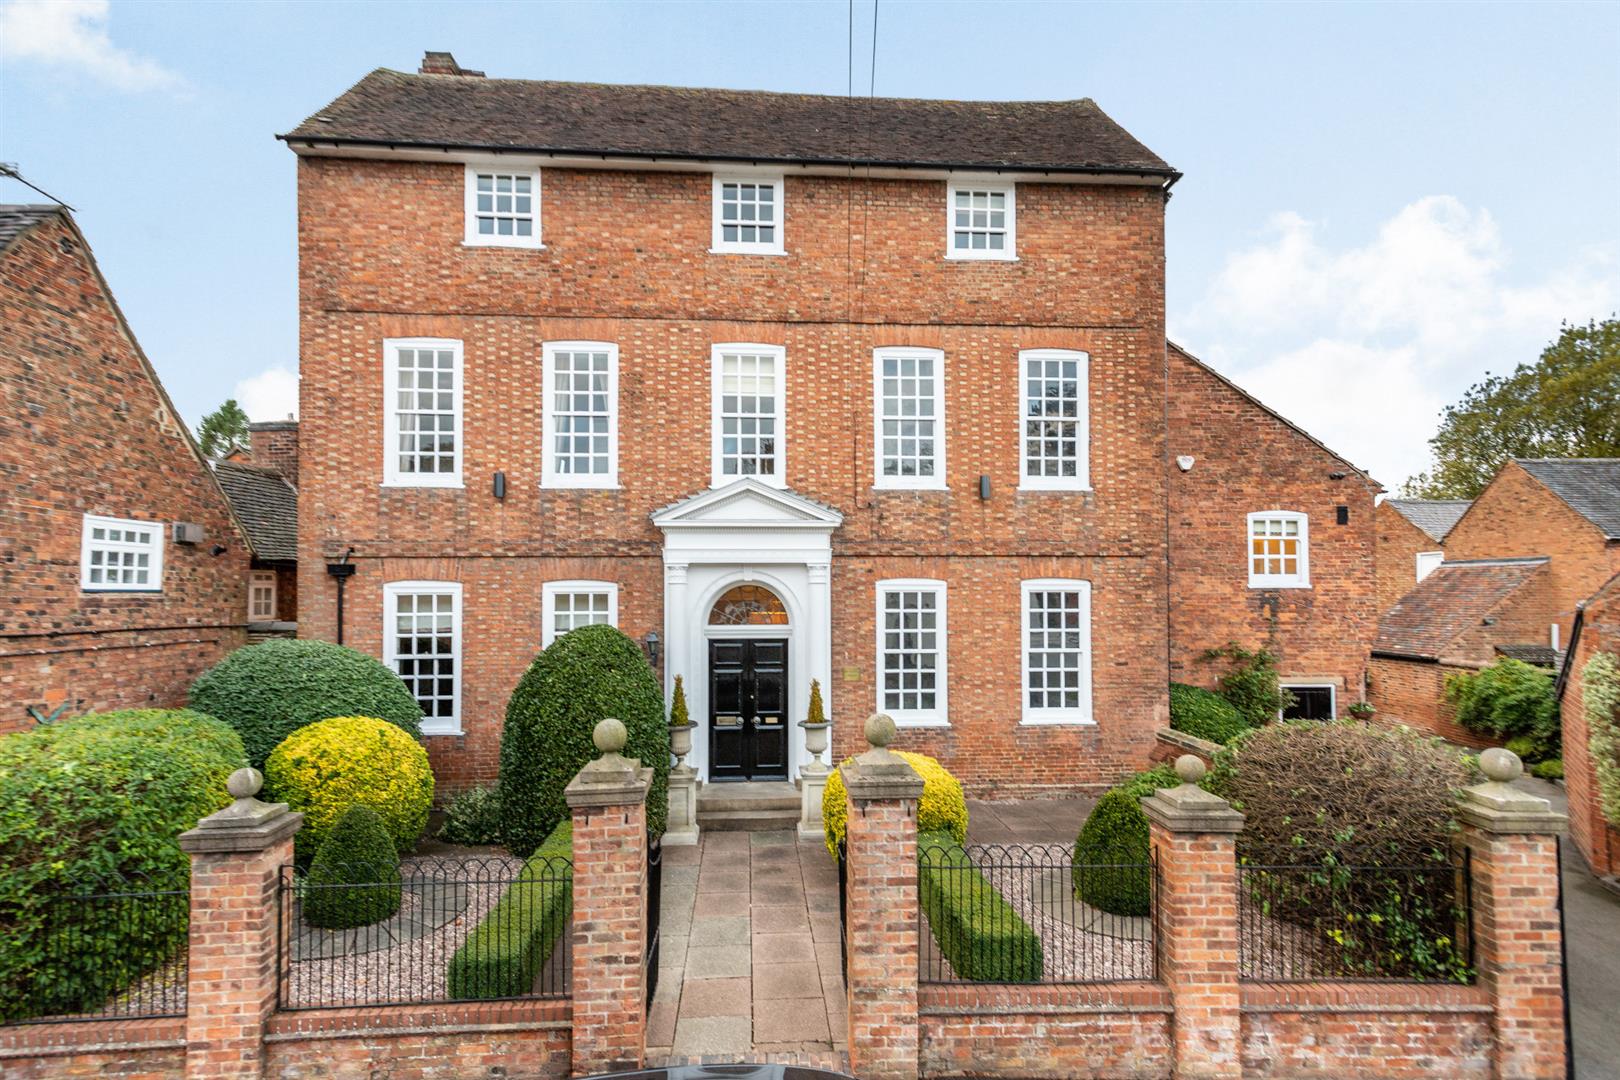 Property in Market Bosworth with 6 bedrooms